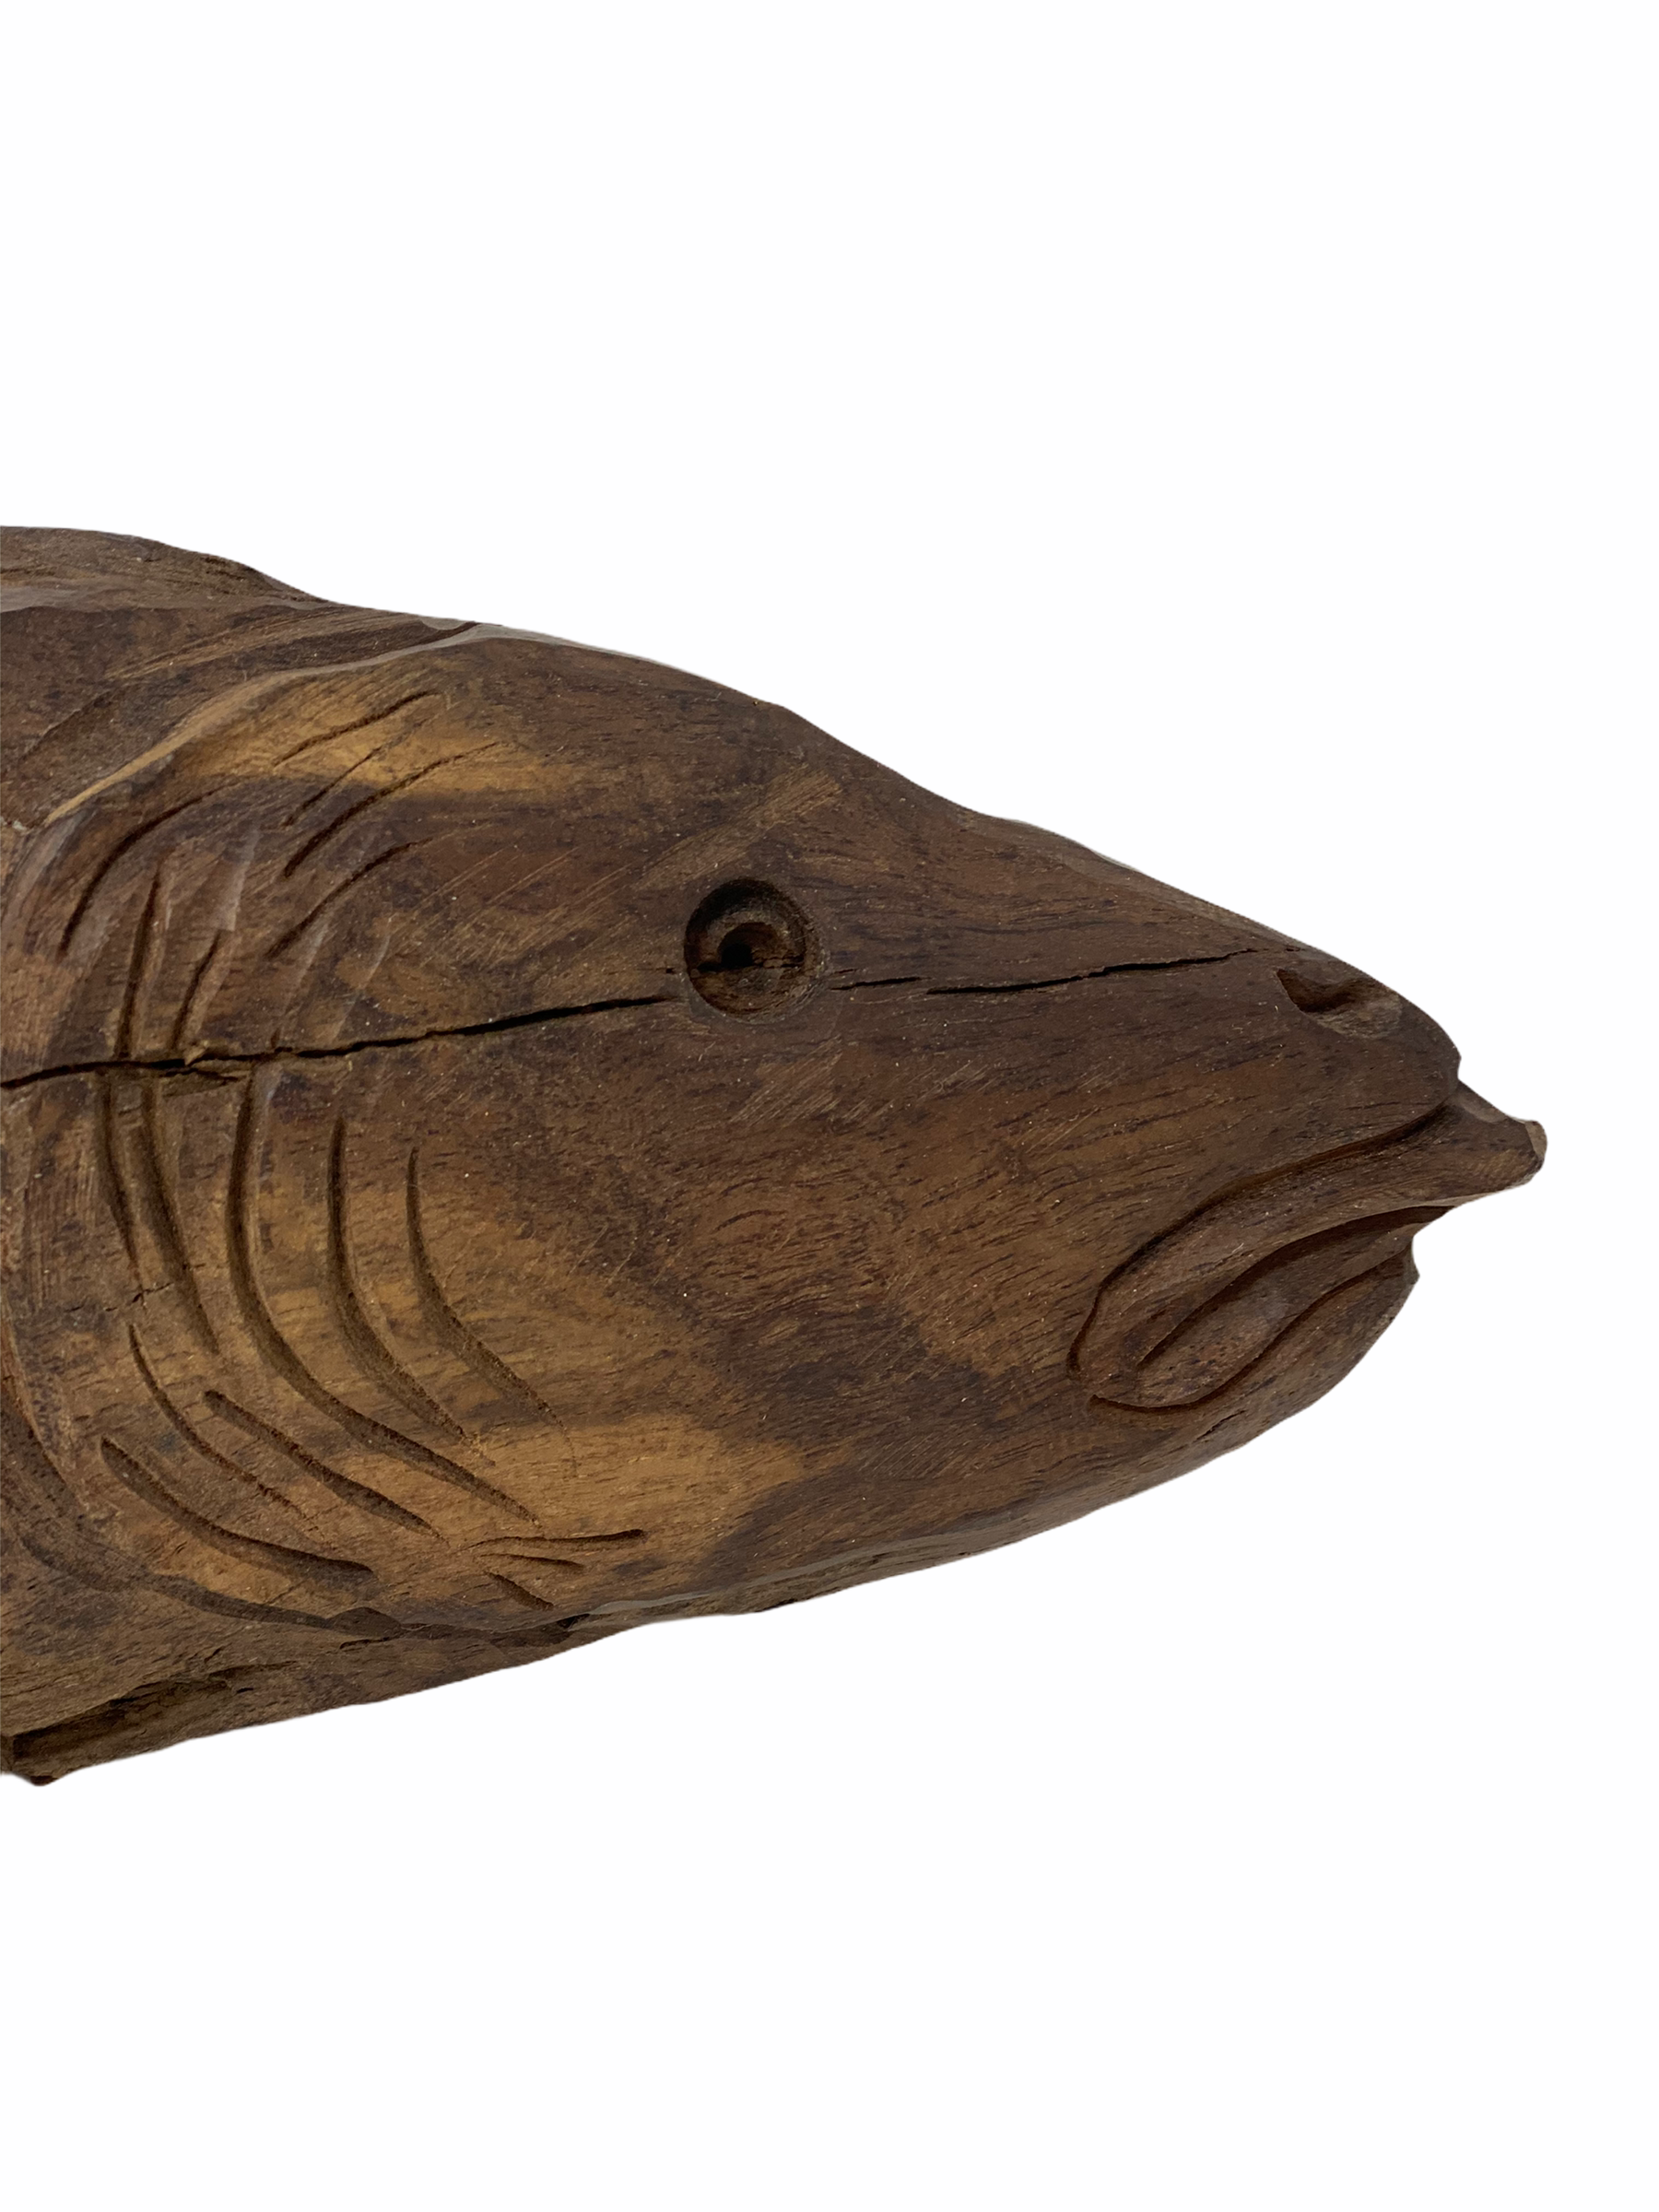 Drift Wood Hand Carved Fish - Large